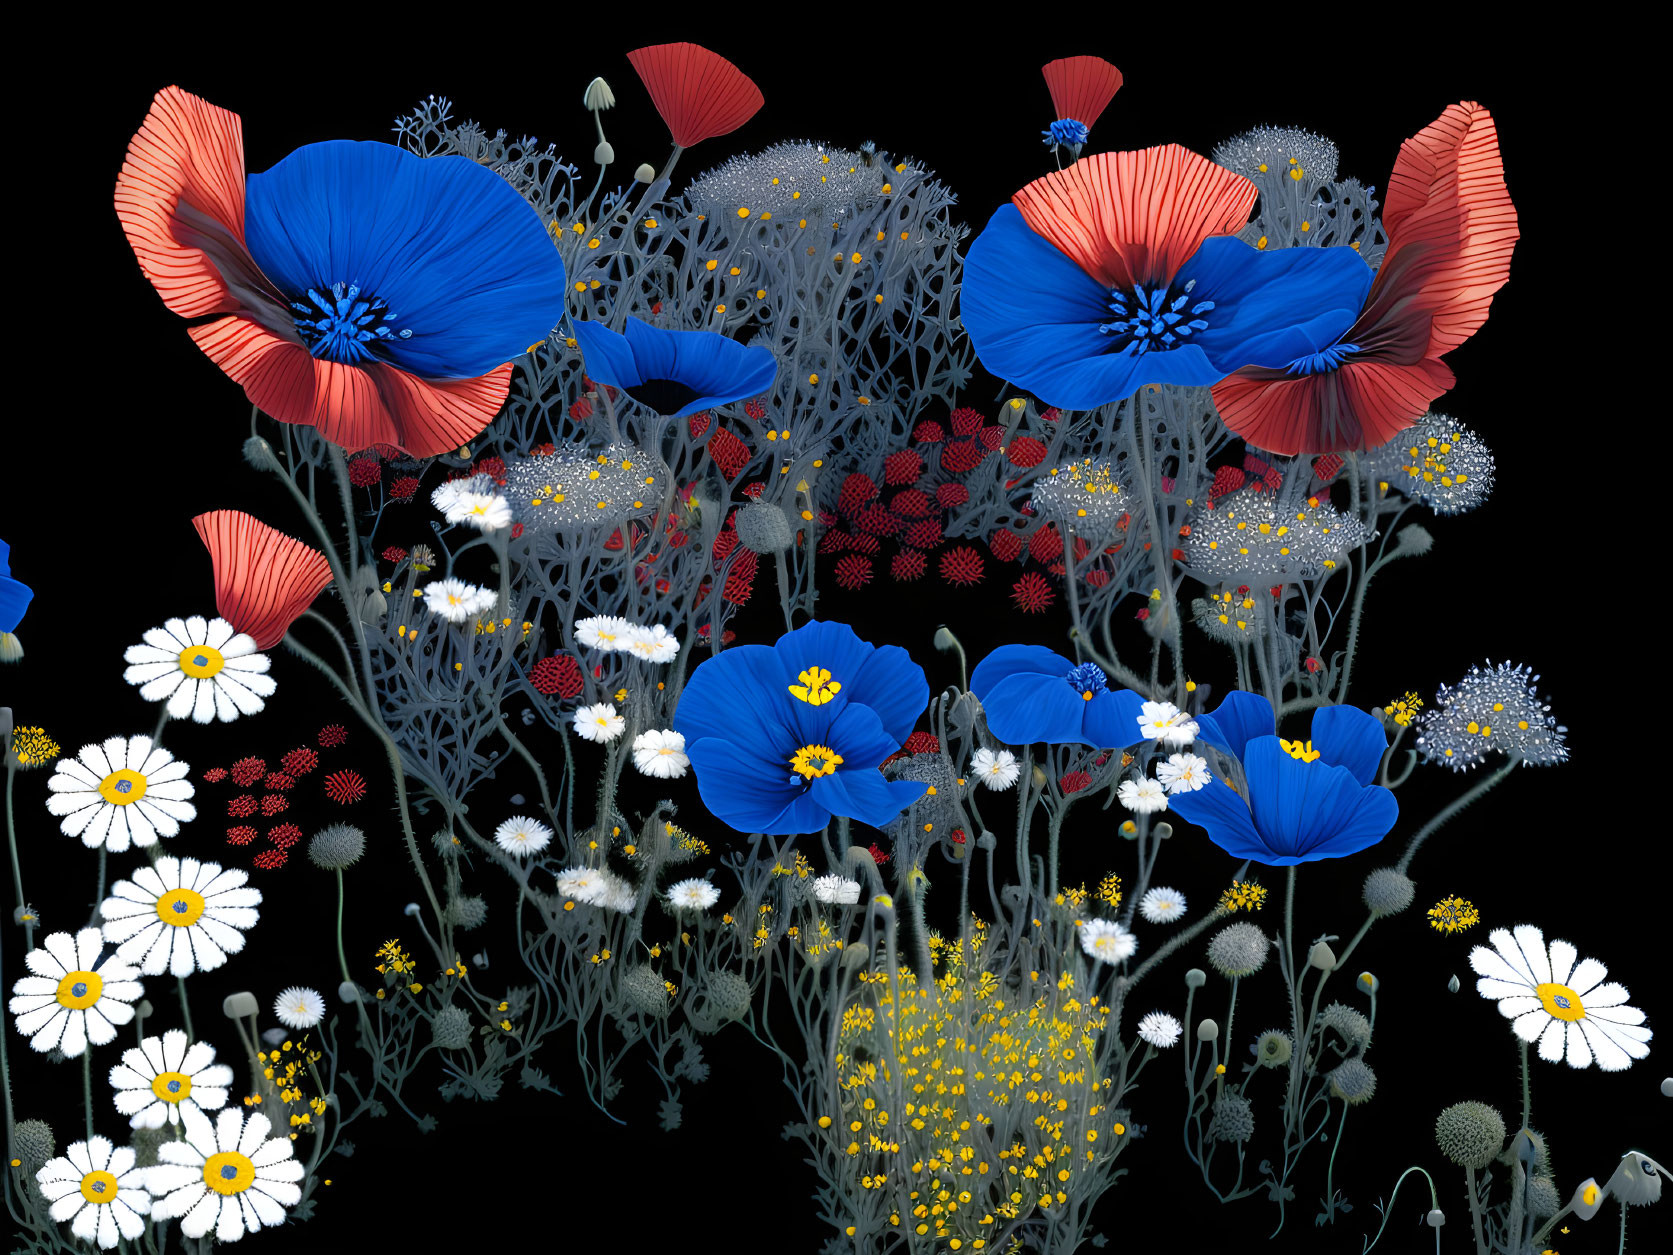 Colorful Illustrated Wildflowers on Black Background with Daisies and Foliage